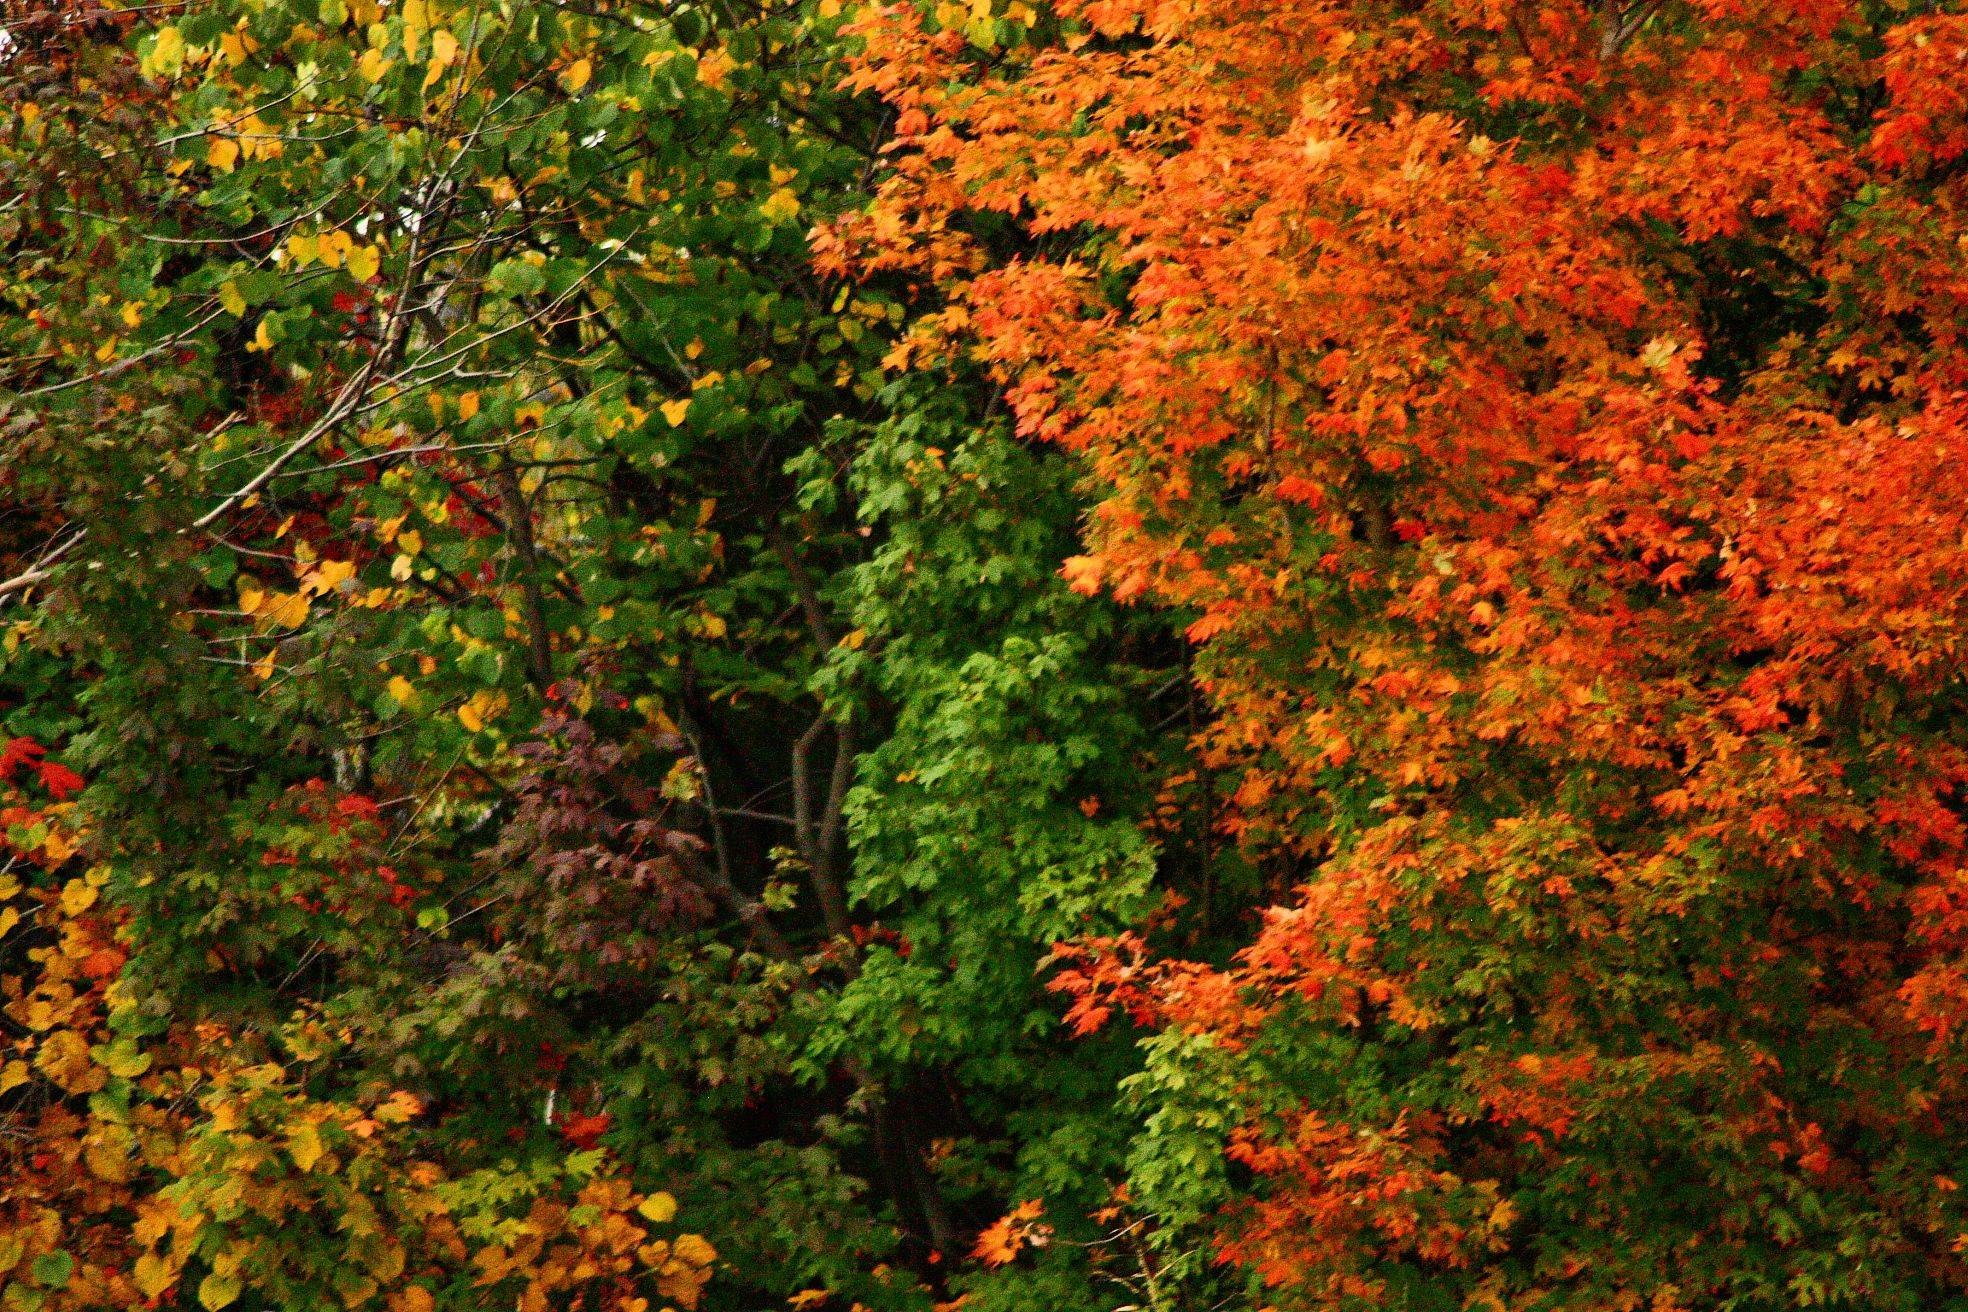 1968x1312 Free-Photos.co | Backgrounds/Digital Backdrops | fall-